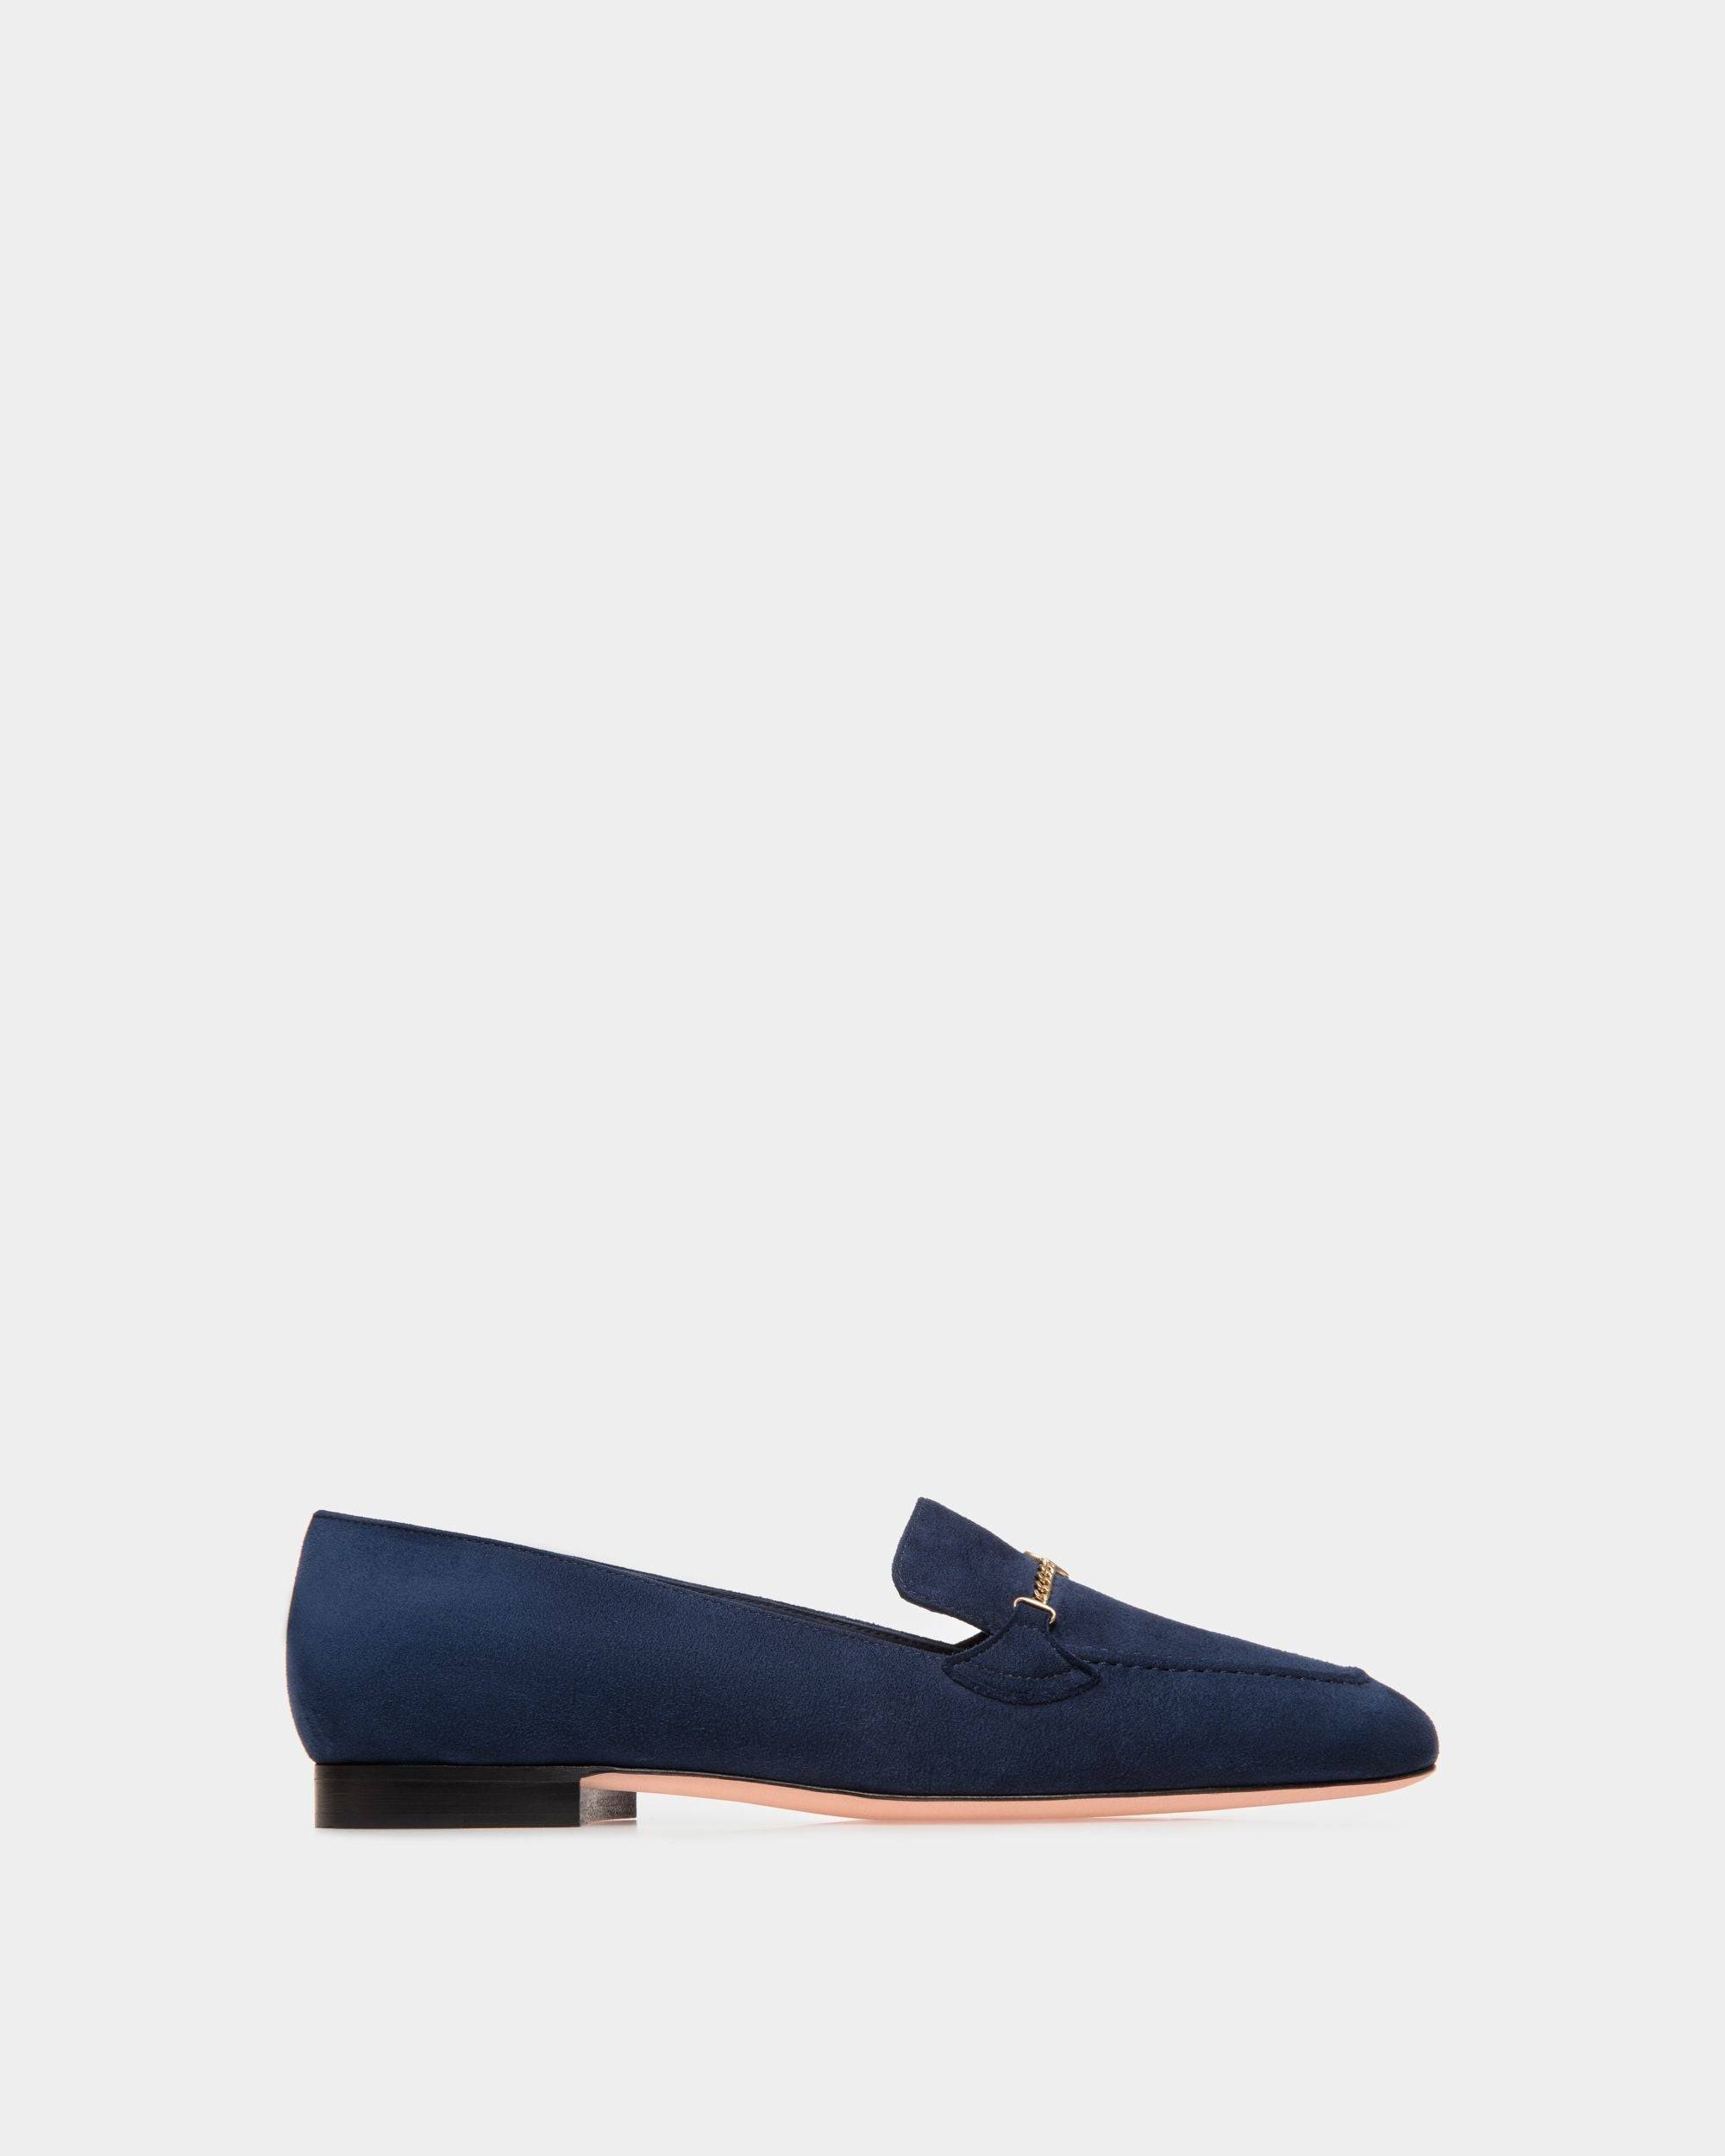 Women's Daily Emblem Loafer in Blue Suede | Bally | Still Life Side